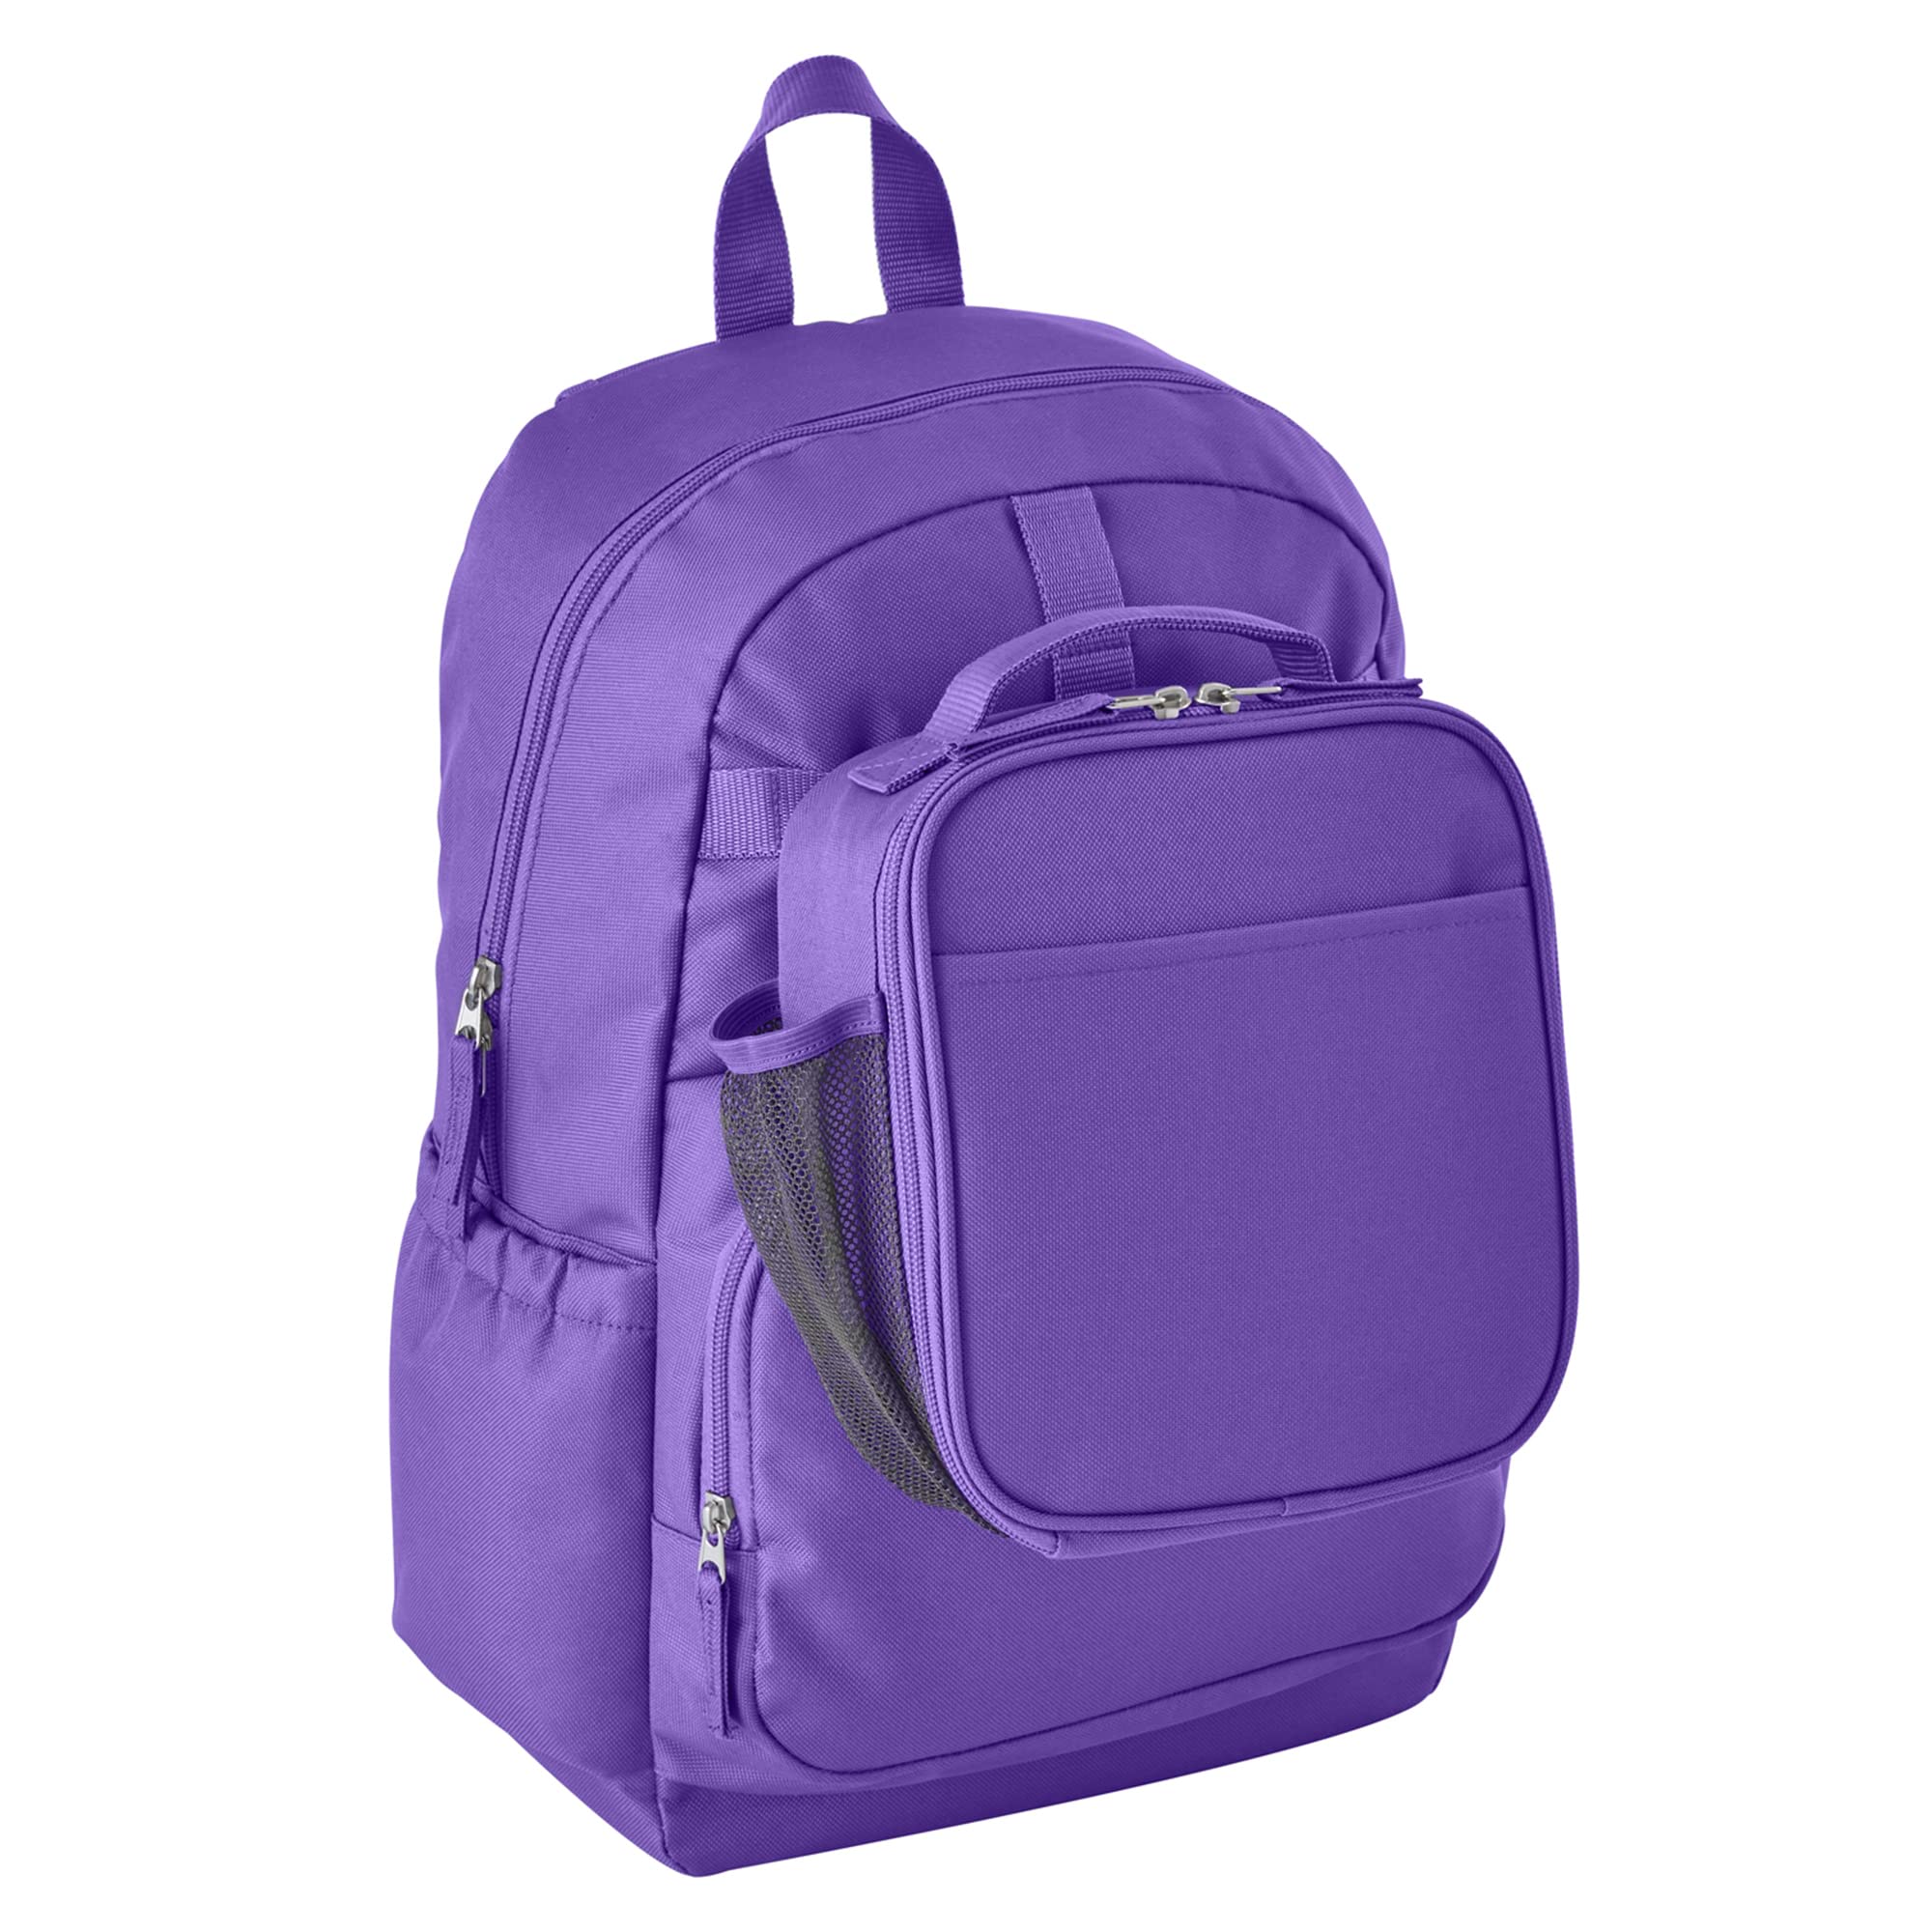 Let's Make Memories Personalized Kids Backpack with Lunch Box (Optional) - Purple, Bright Hearts